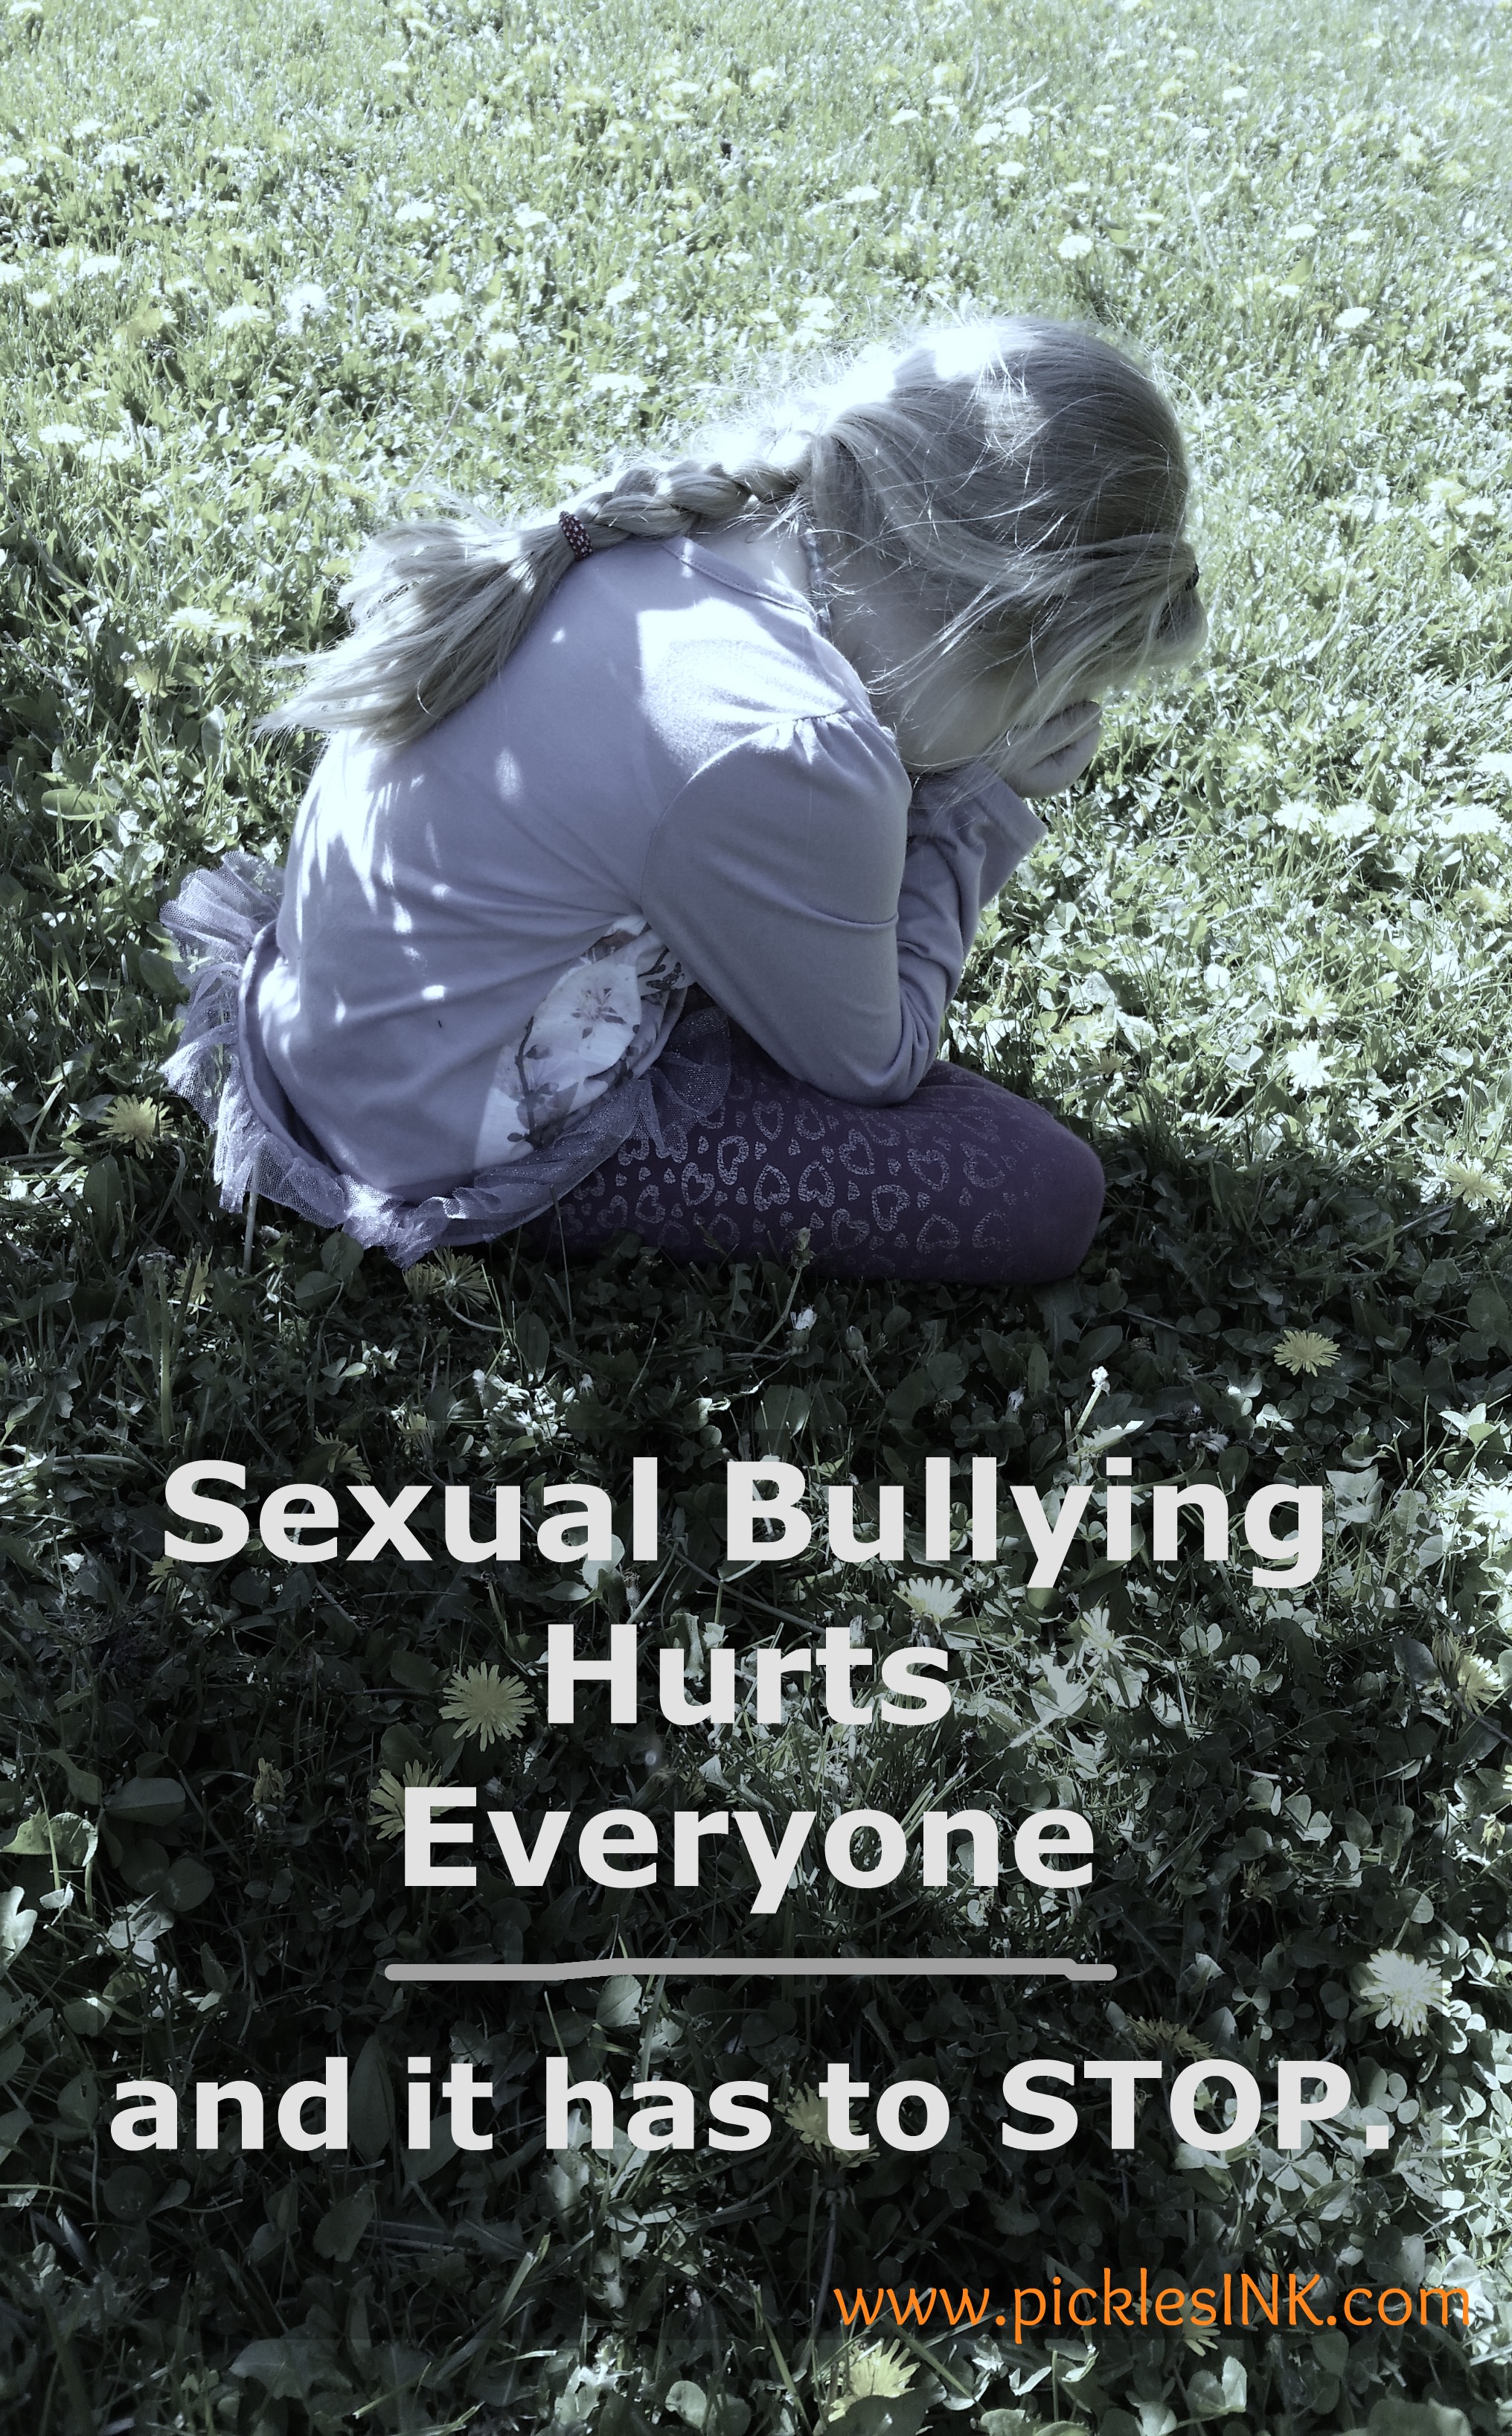 Sexual Bullying At Schools Has To Stop